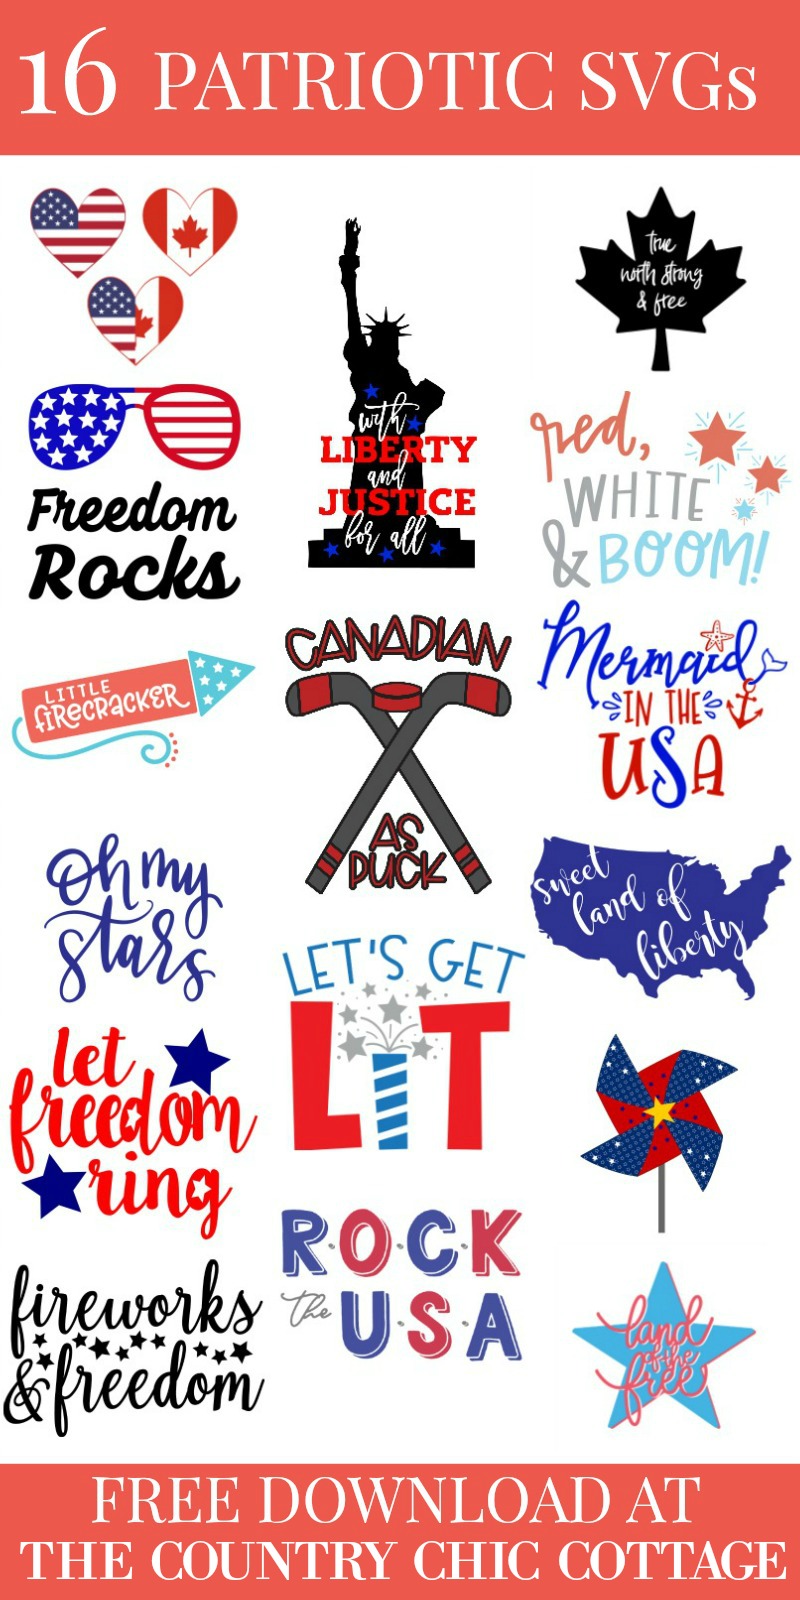 Download Patriotic SVG: 15 Free Files for Your Crafts - The Country Chic Cottage